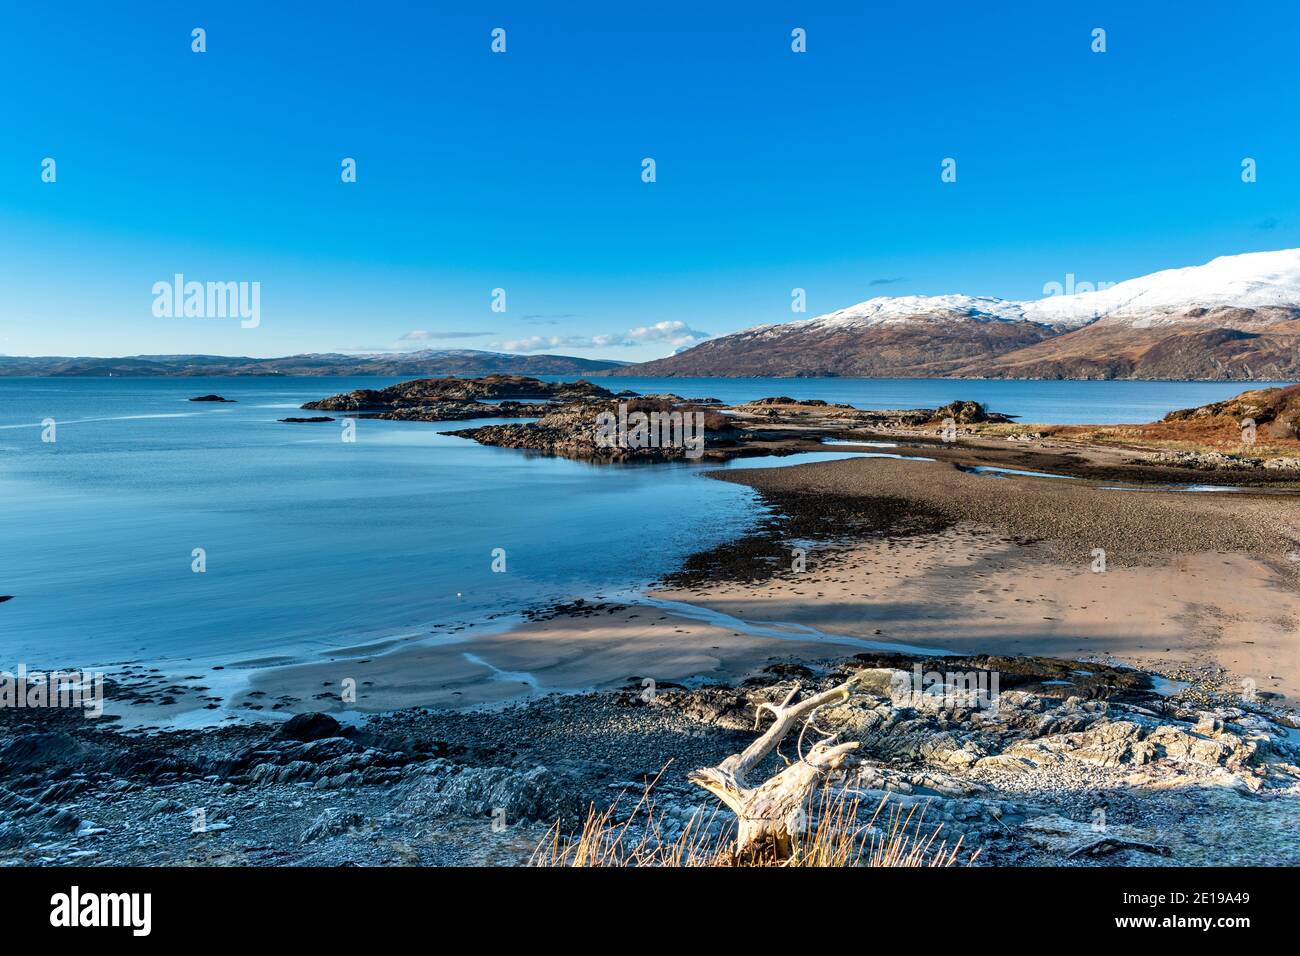 SCOTLAND WEST COAST HIGHLANDS KINTAIL SANDAIG BAY ISLANDS BEACH THE MOUTH OF THE RIVER AND SNOW COVERED MOUNTAINS OF SKYE IN WINTER Stock Photo